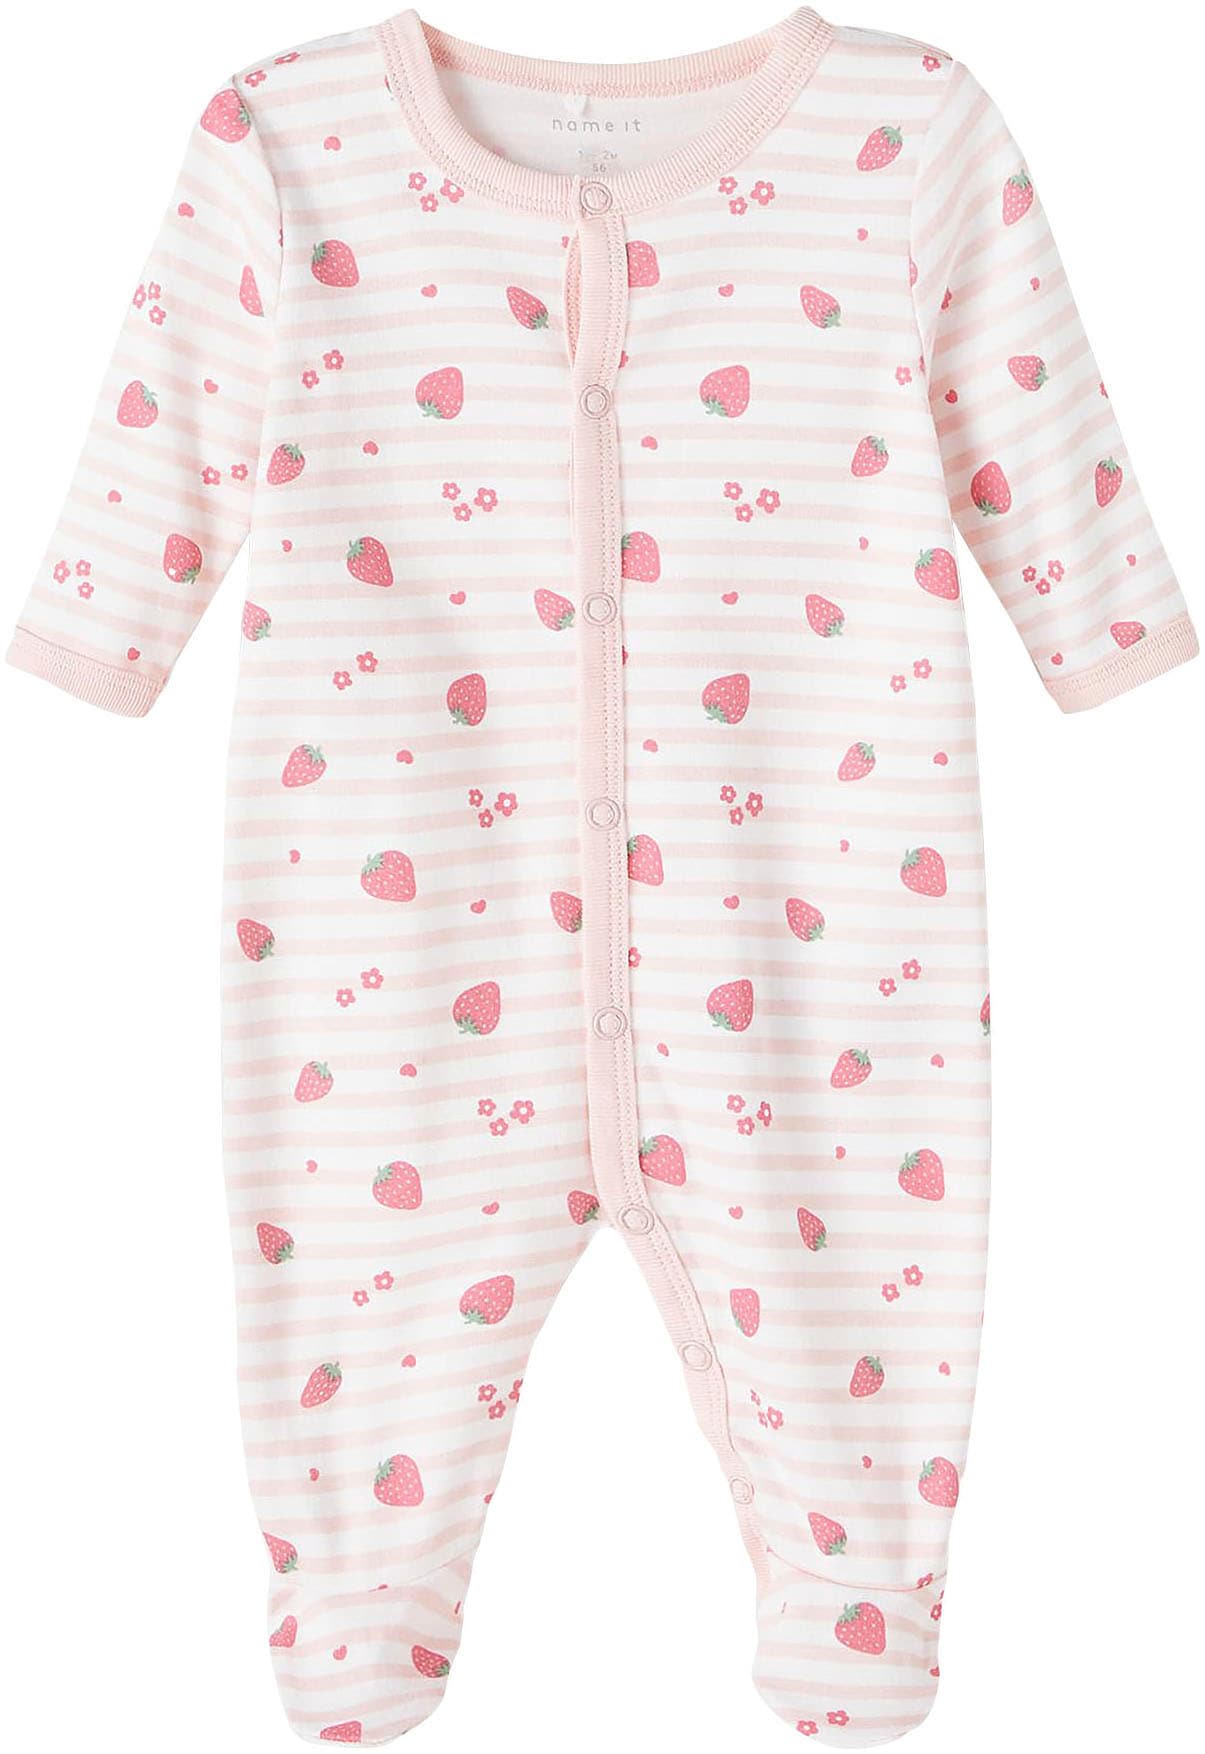 OTTO STRAWBERRY tlg.) kaufen »NBFNIGHTSUIT bei It Name NOOS«, 2P (Packung, 2 Schlafoverall W/F